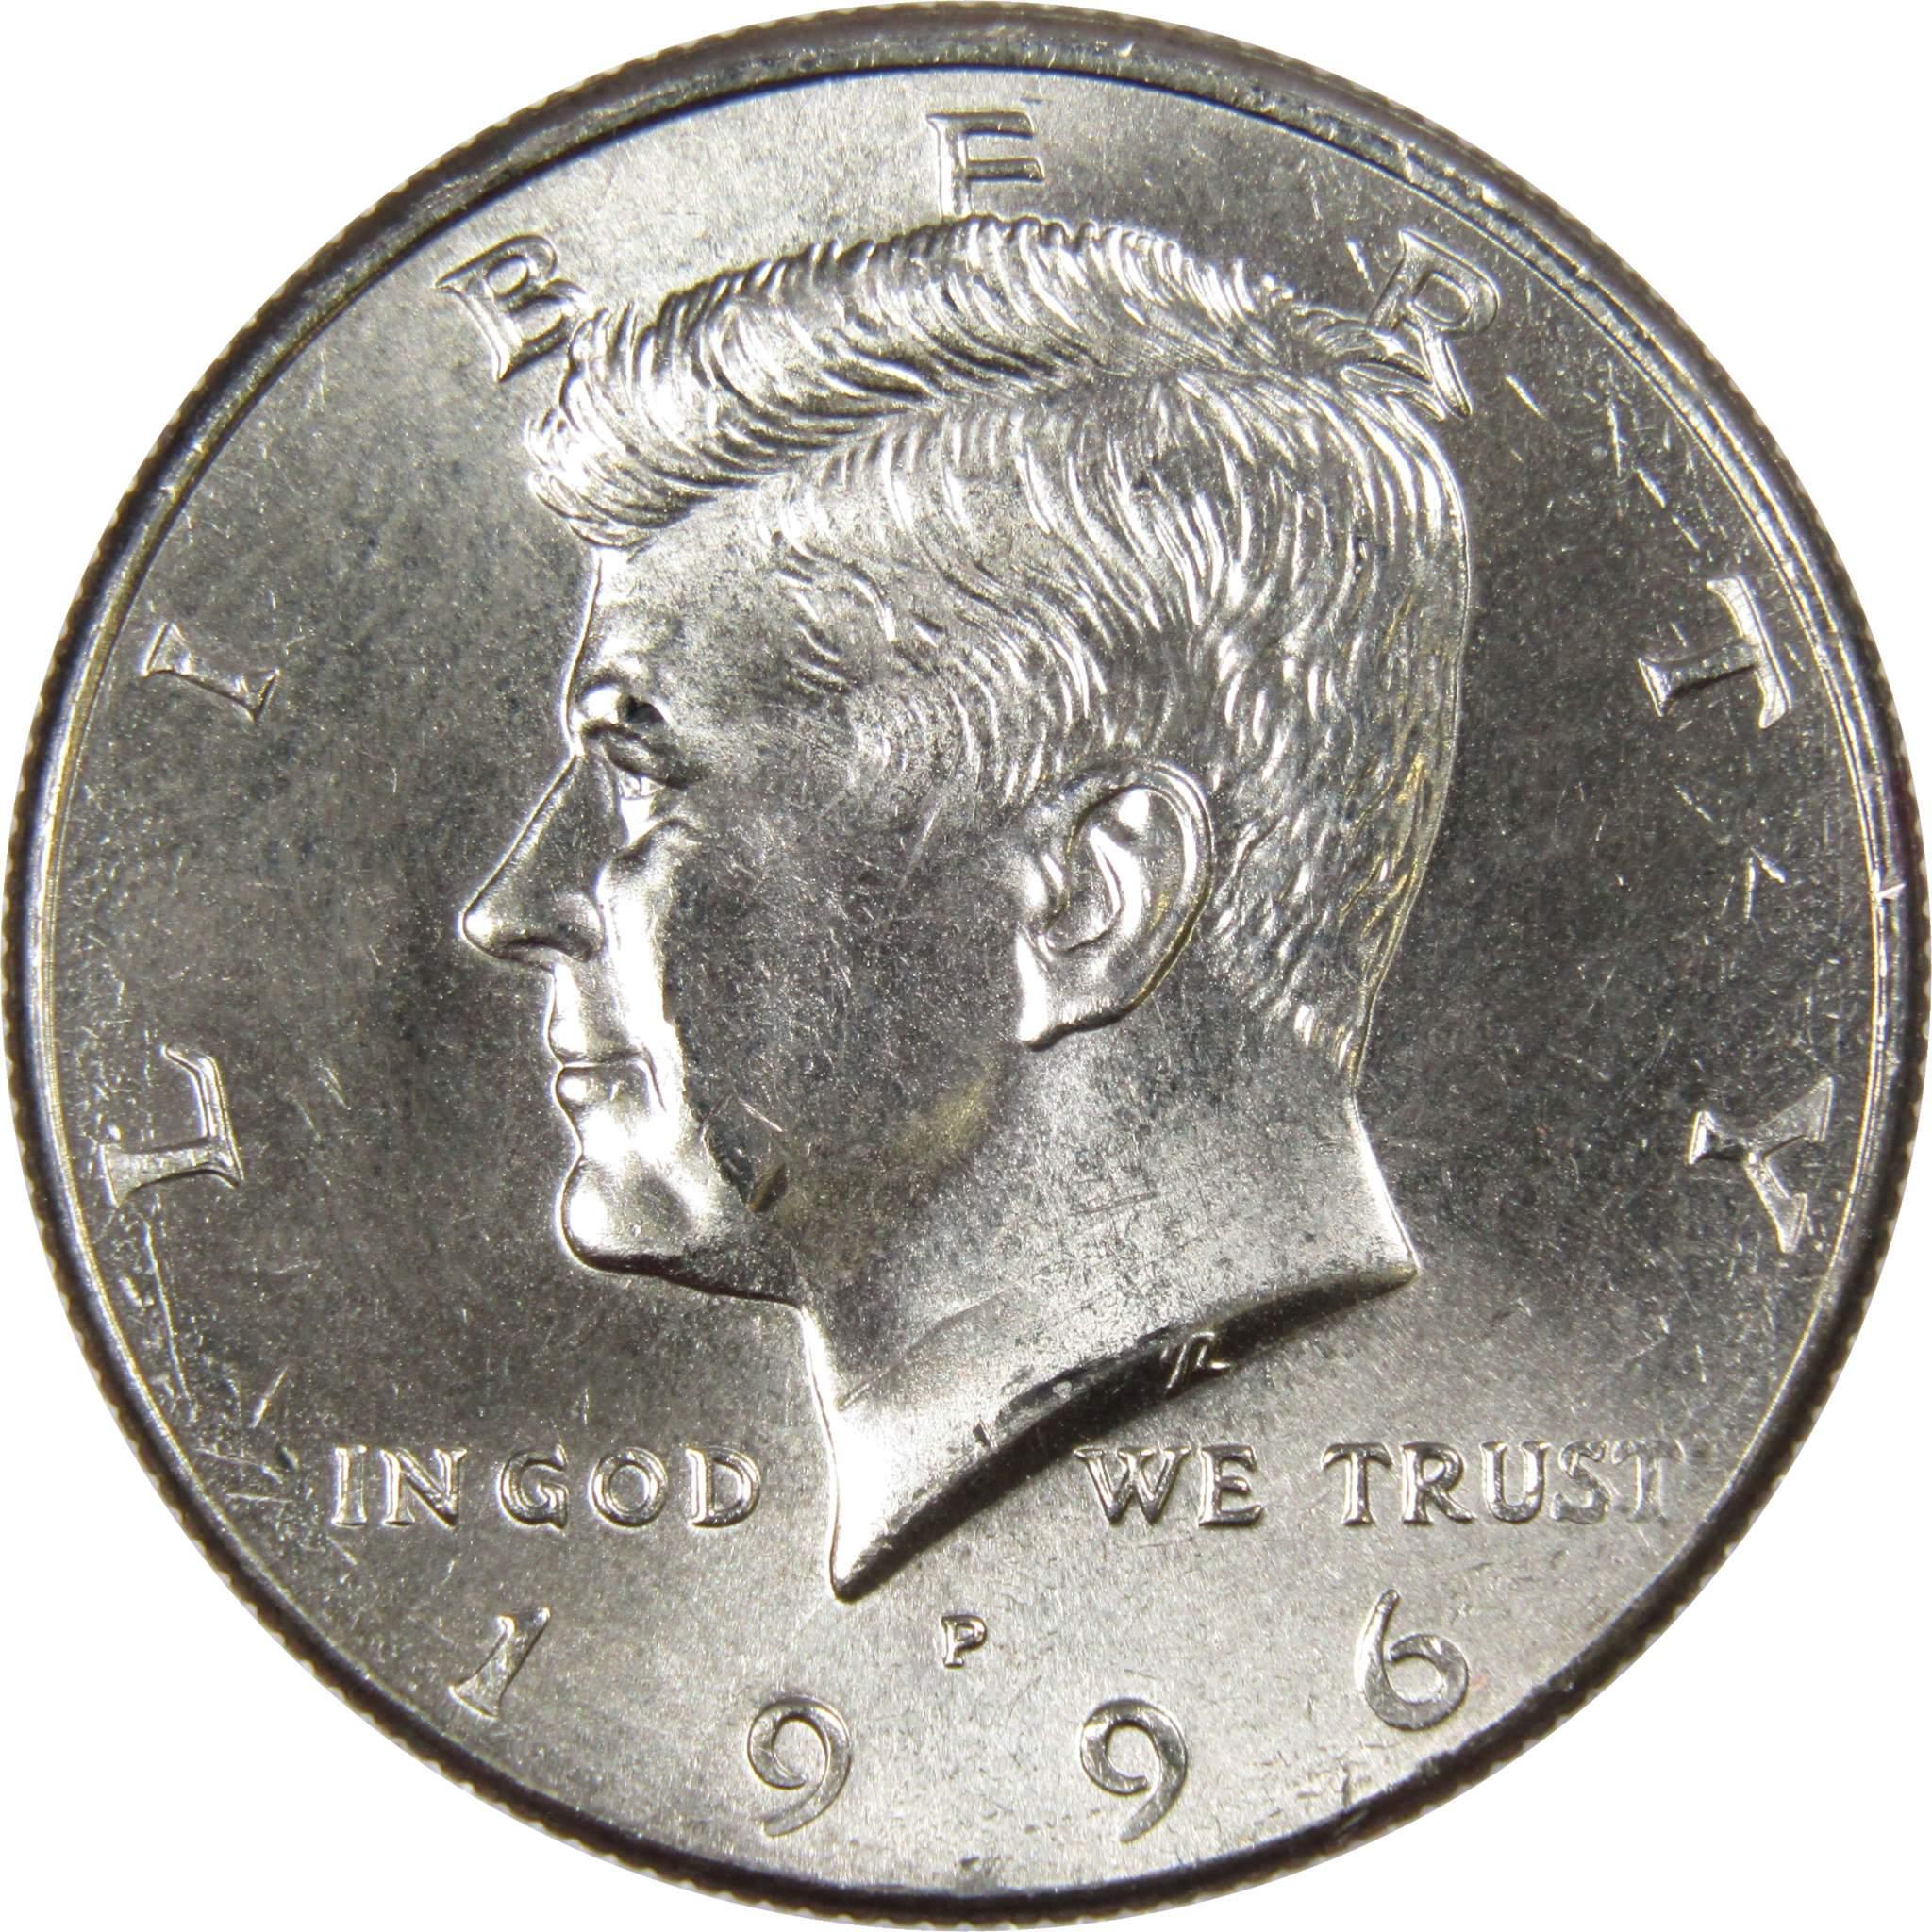 1996 P Kennedy Half Dollar BU Uncirculated Mint State 50c US Coin Collectible